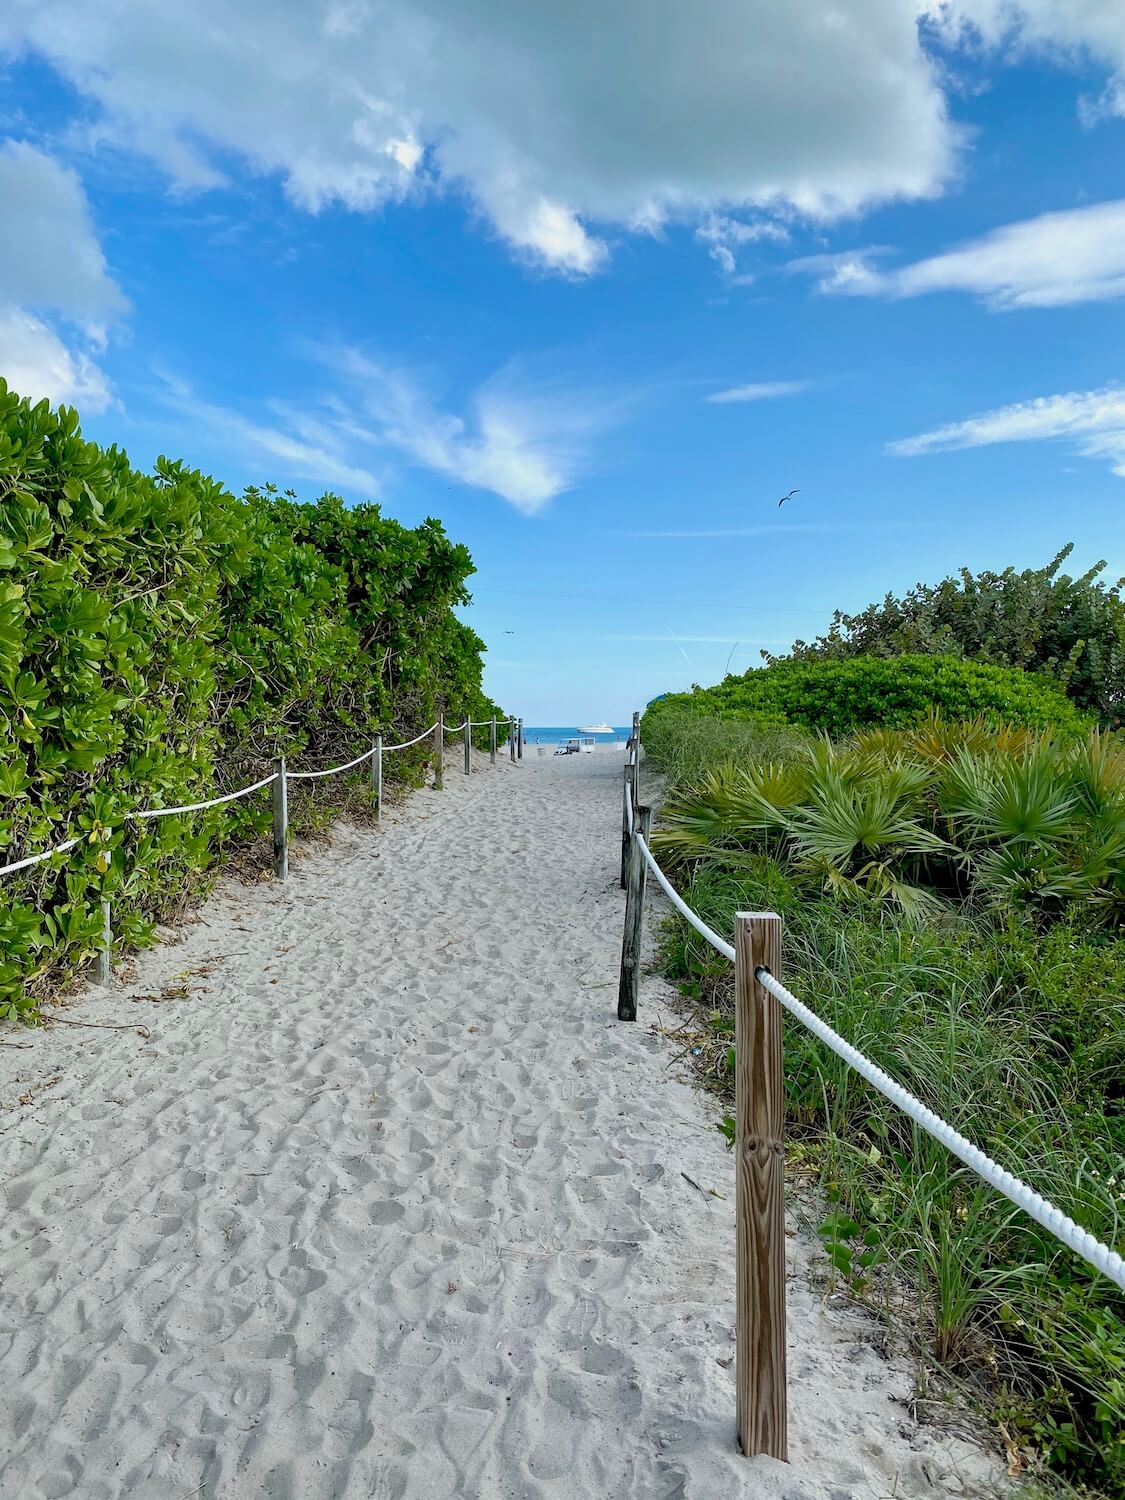 A sandy path leads along a rope fence toward the beach with blue sky and white puffy clouds.  Green bushes lines the pathway.